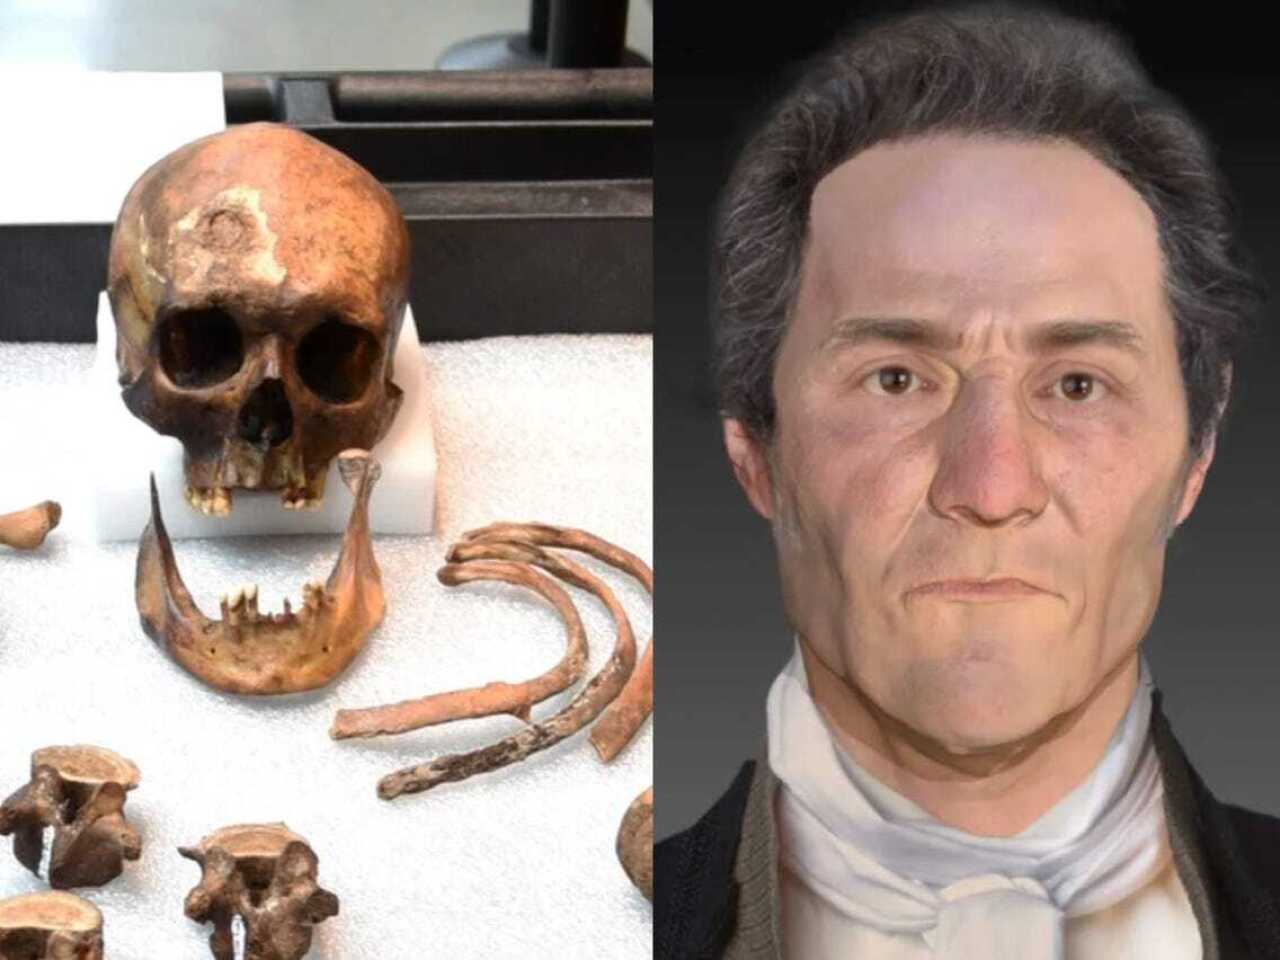 [IMAGE] 19th century 'vampire' was buried with thigh bones crossed over chest